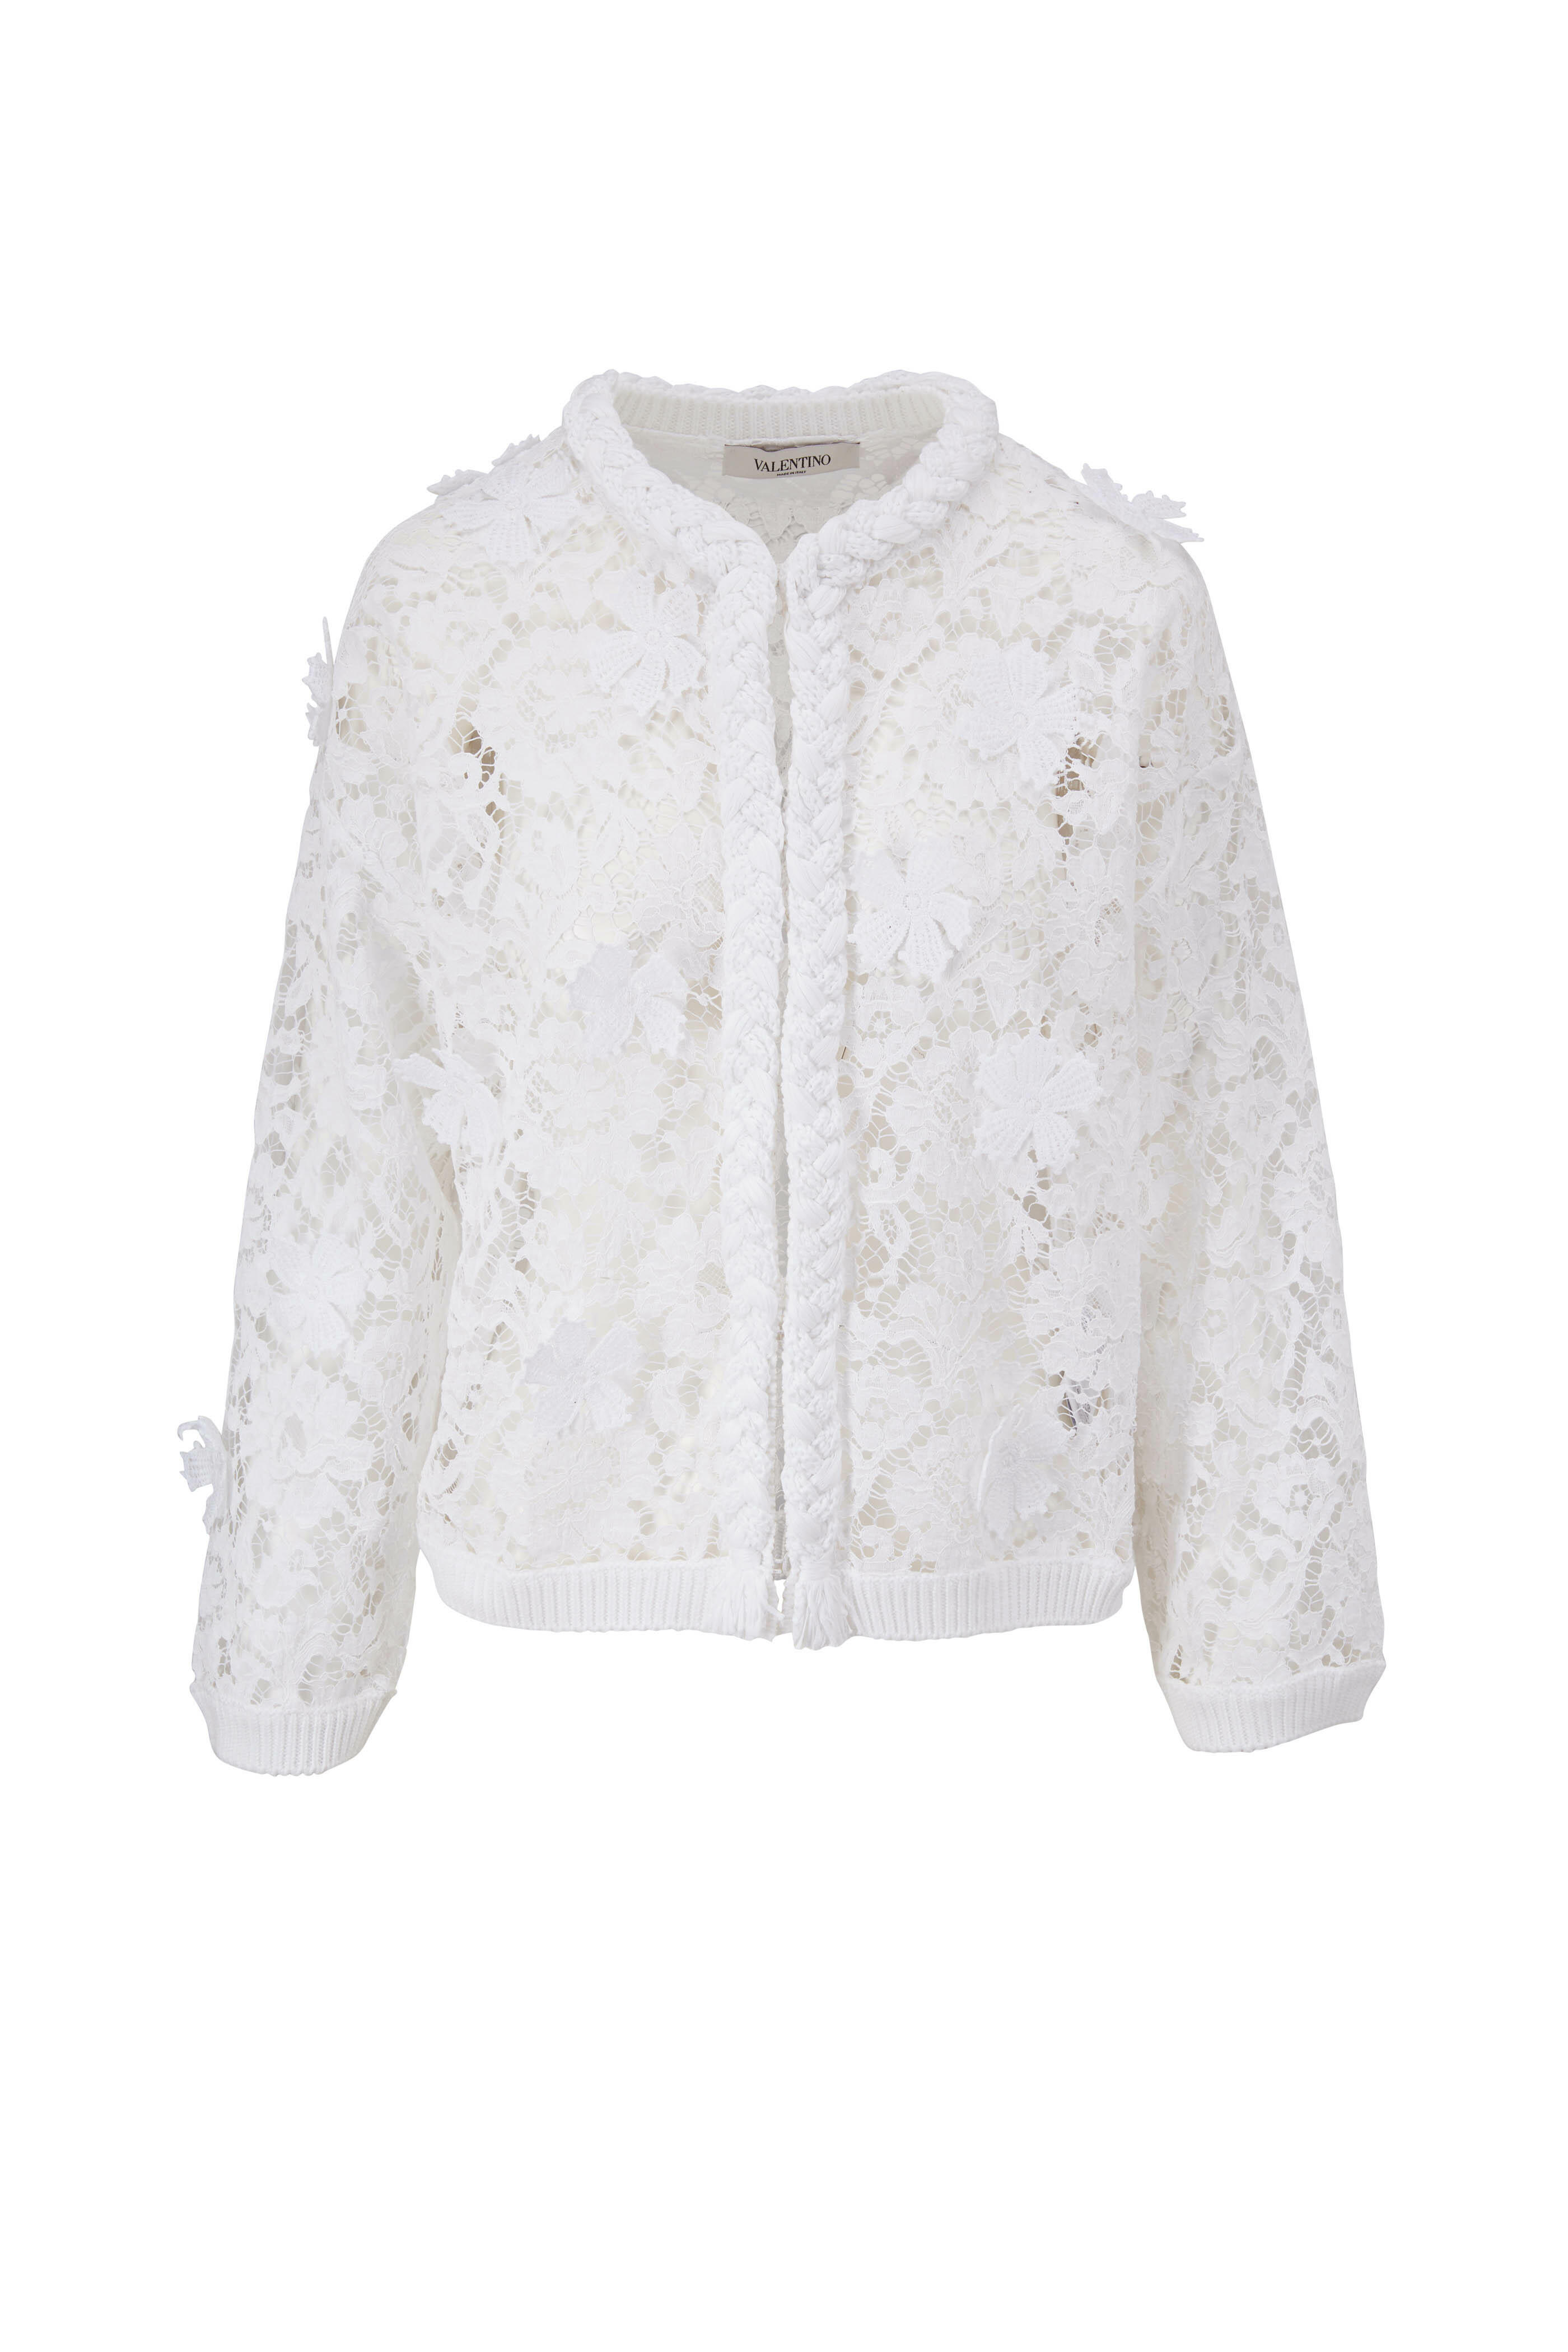 Valentino - White Floral Lace Bomber Jacket | Stores